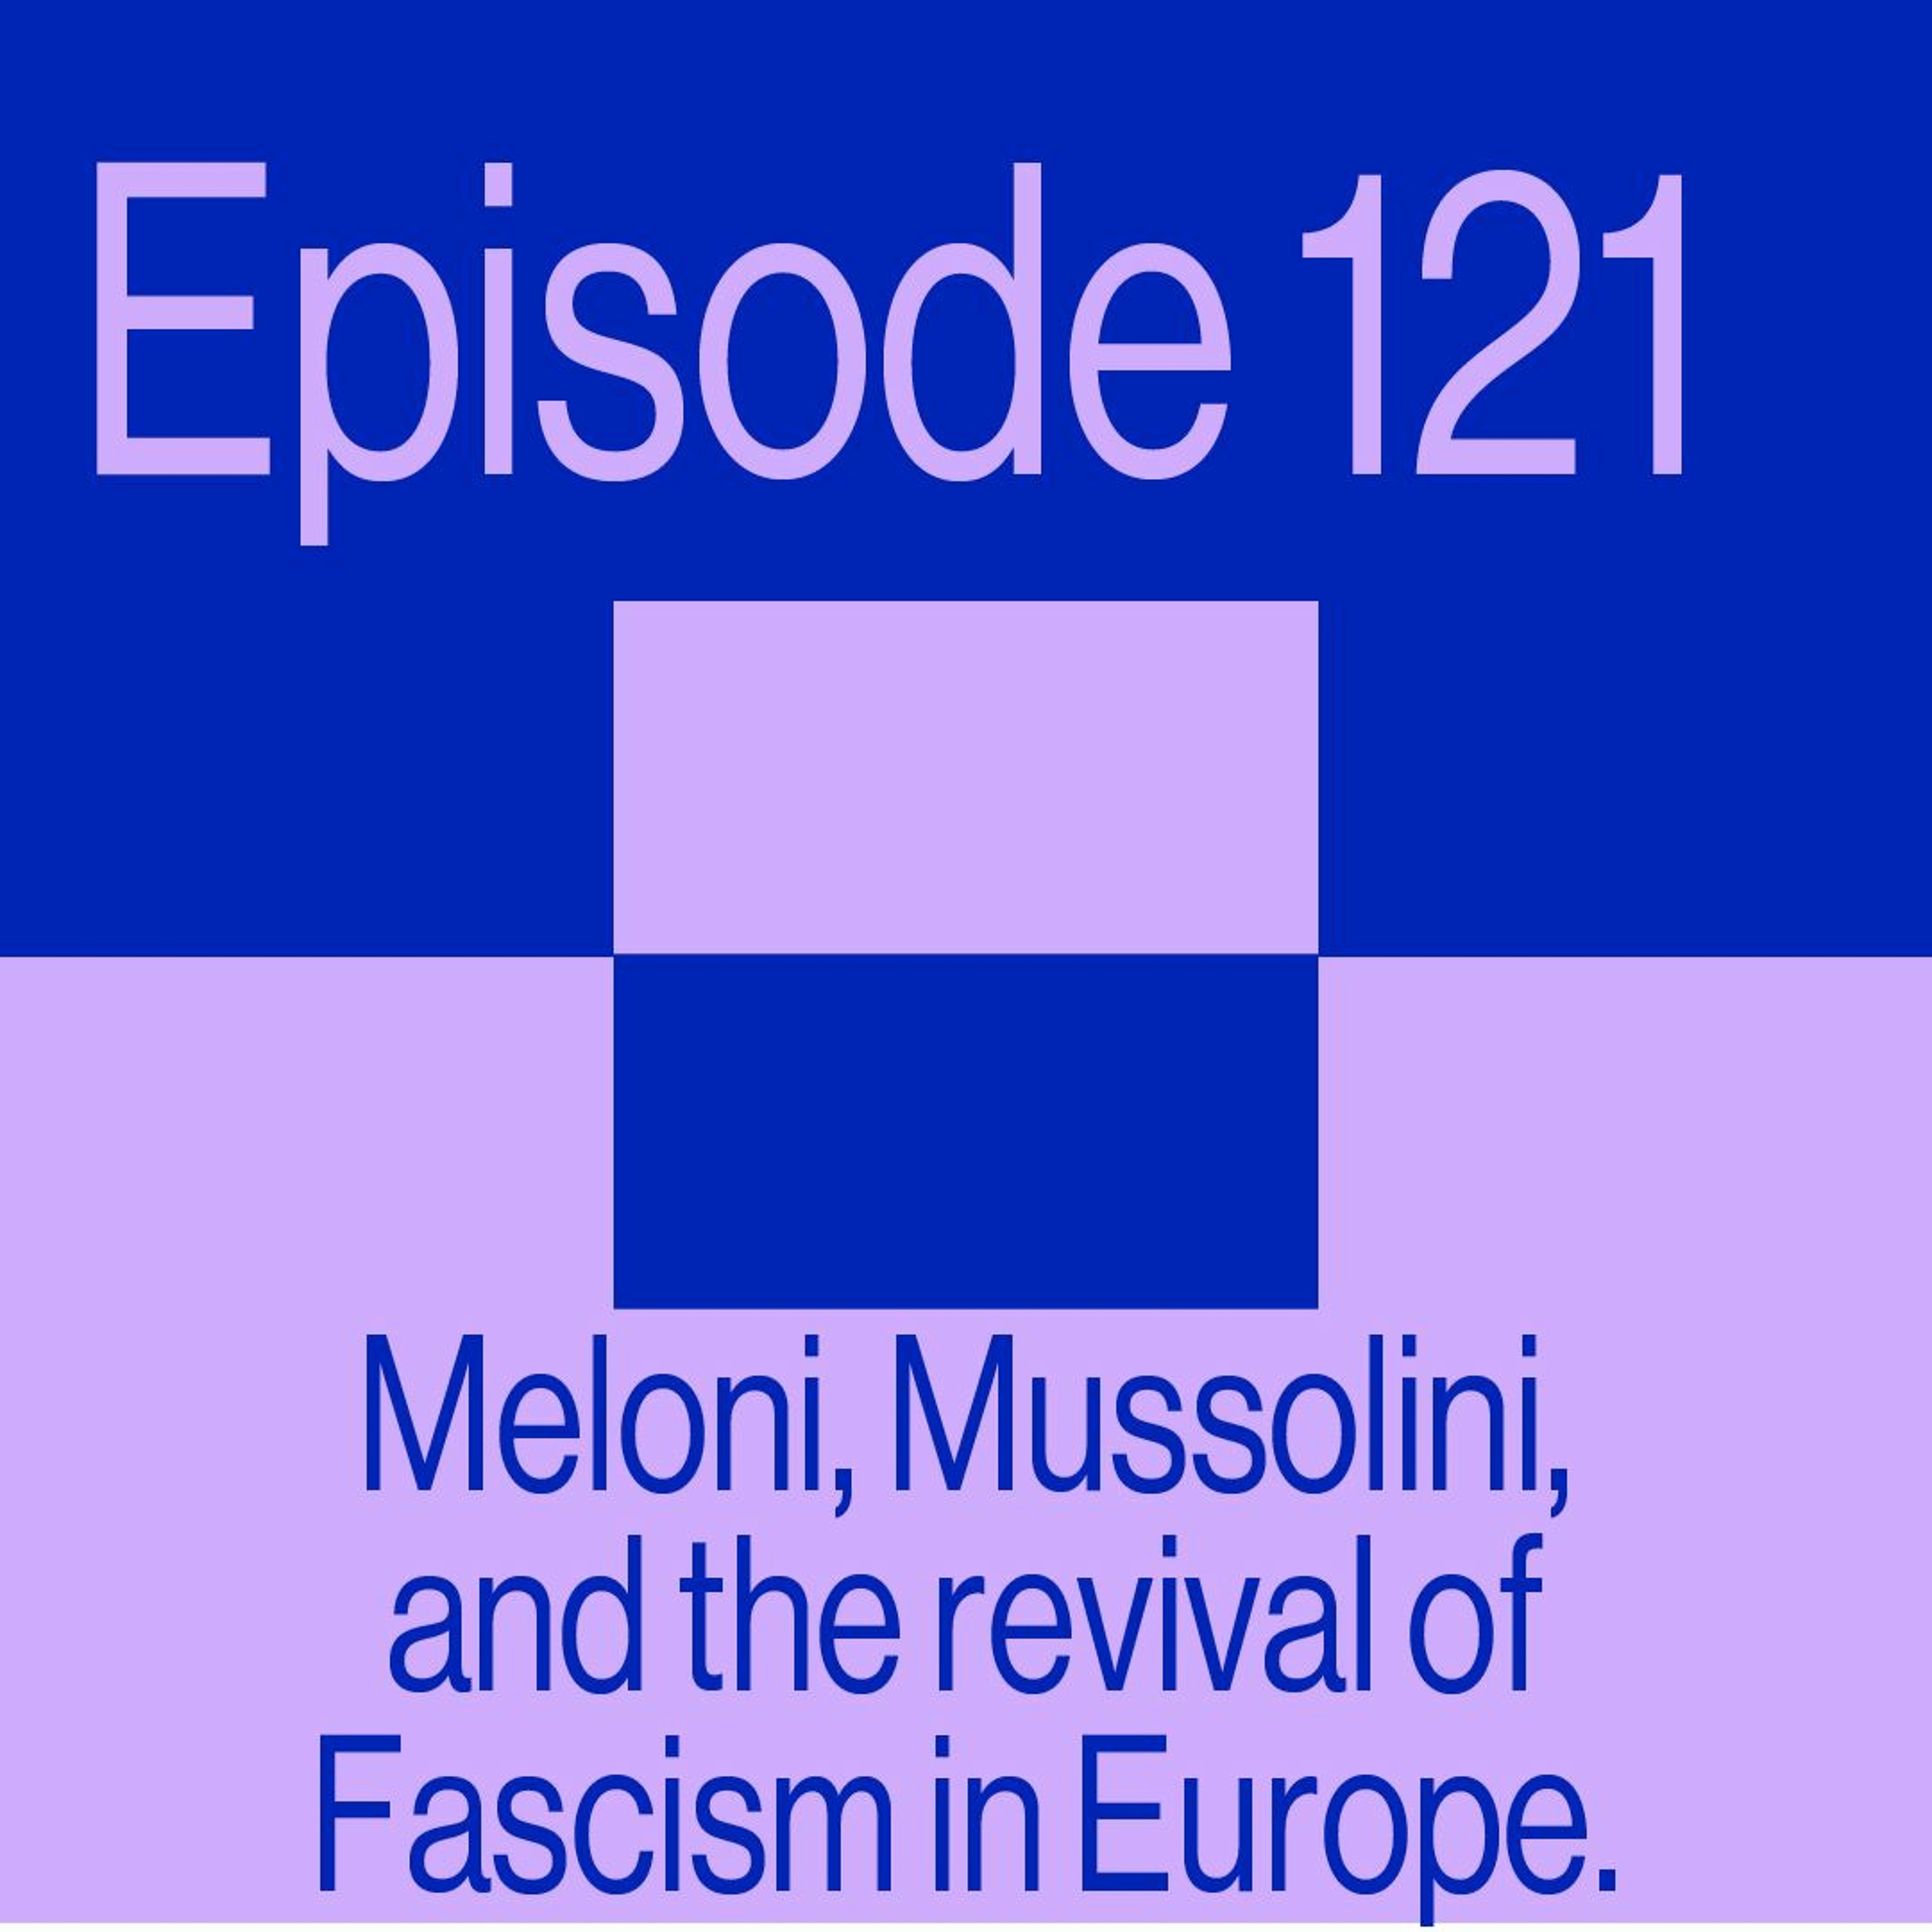 Episode 121: Meloni, Mussolini, and the revival of Fascism in Europe